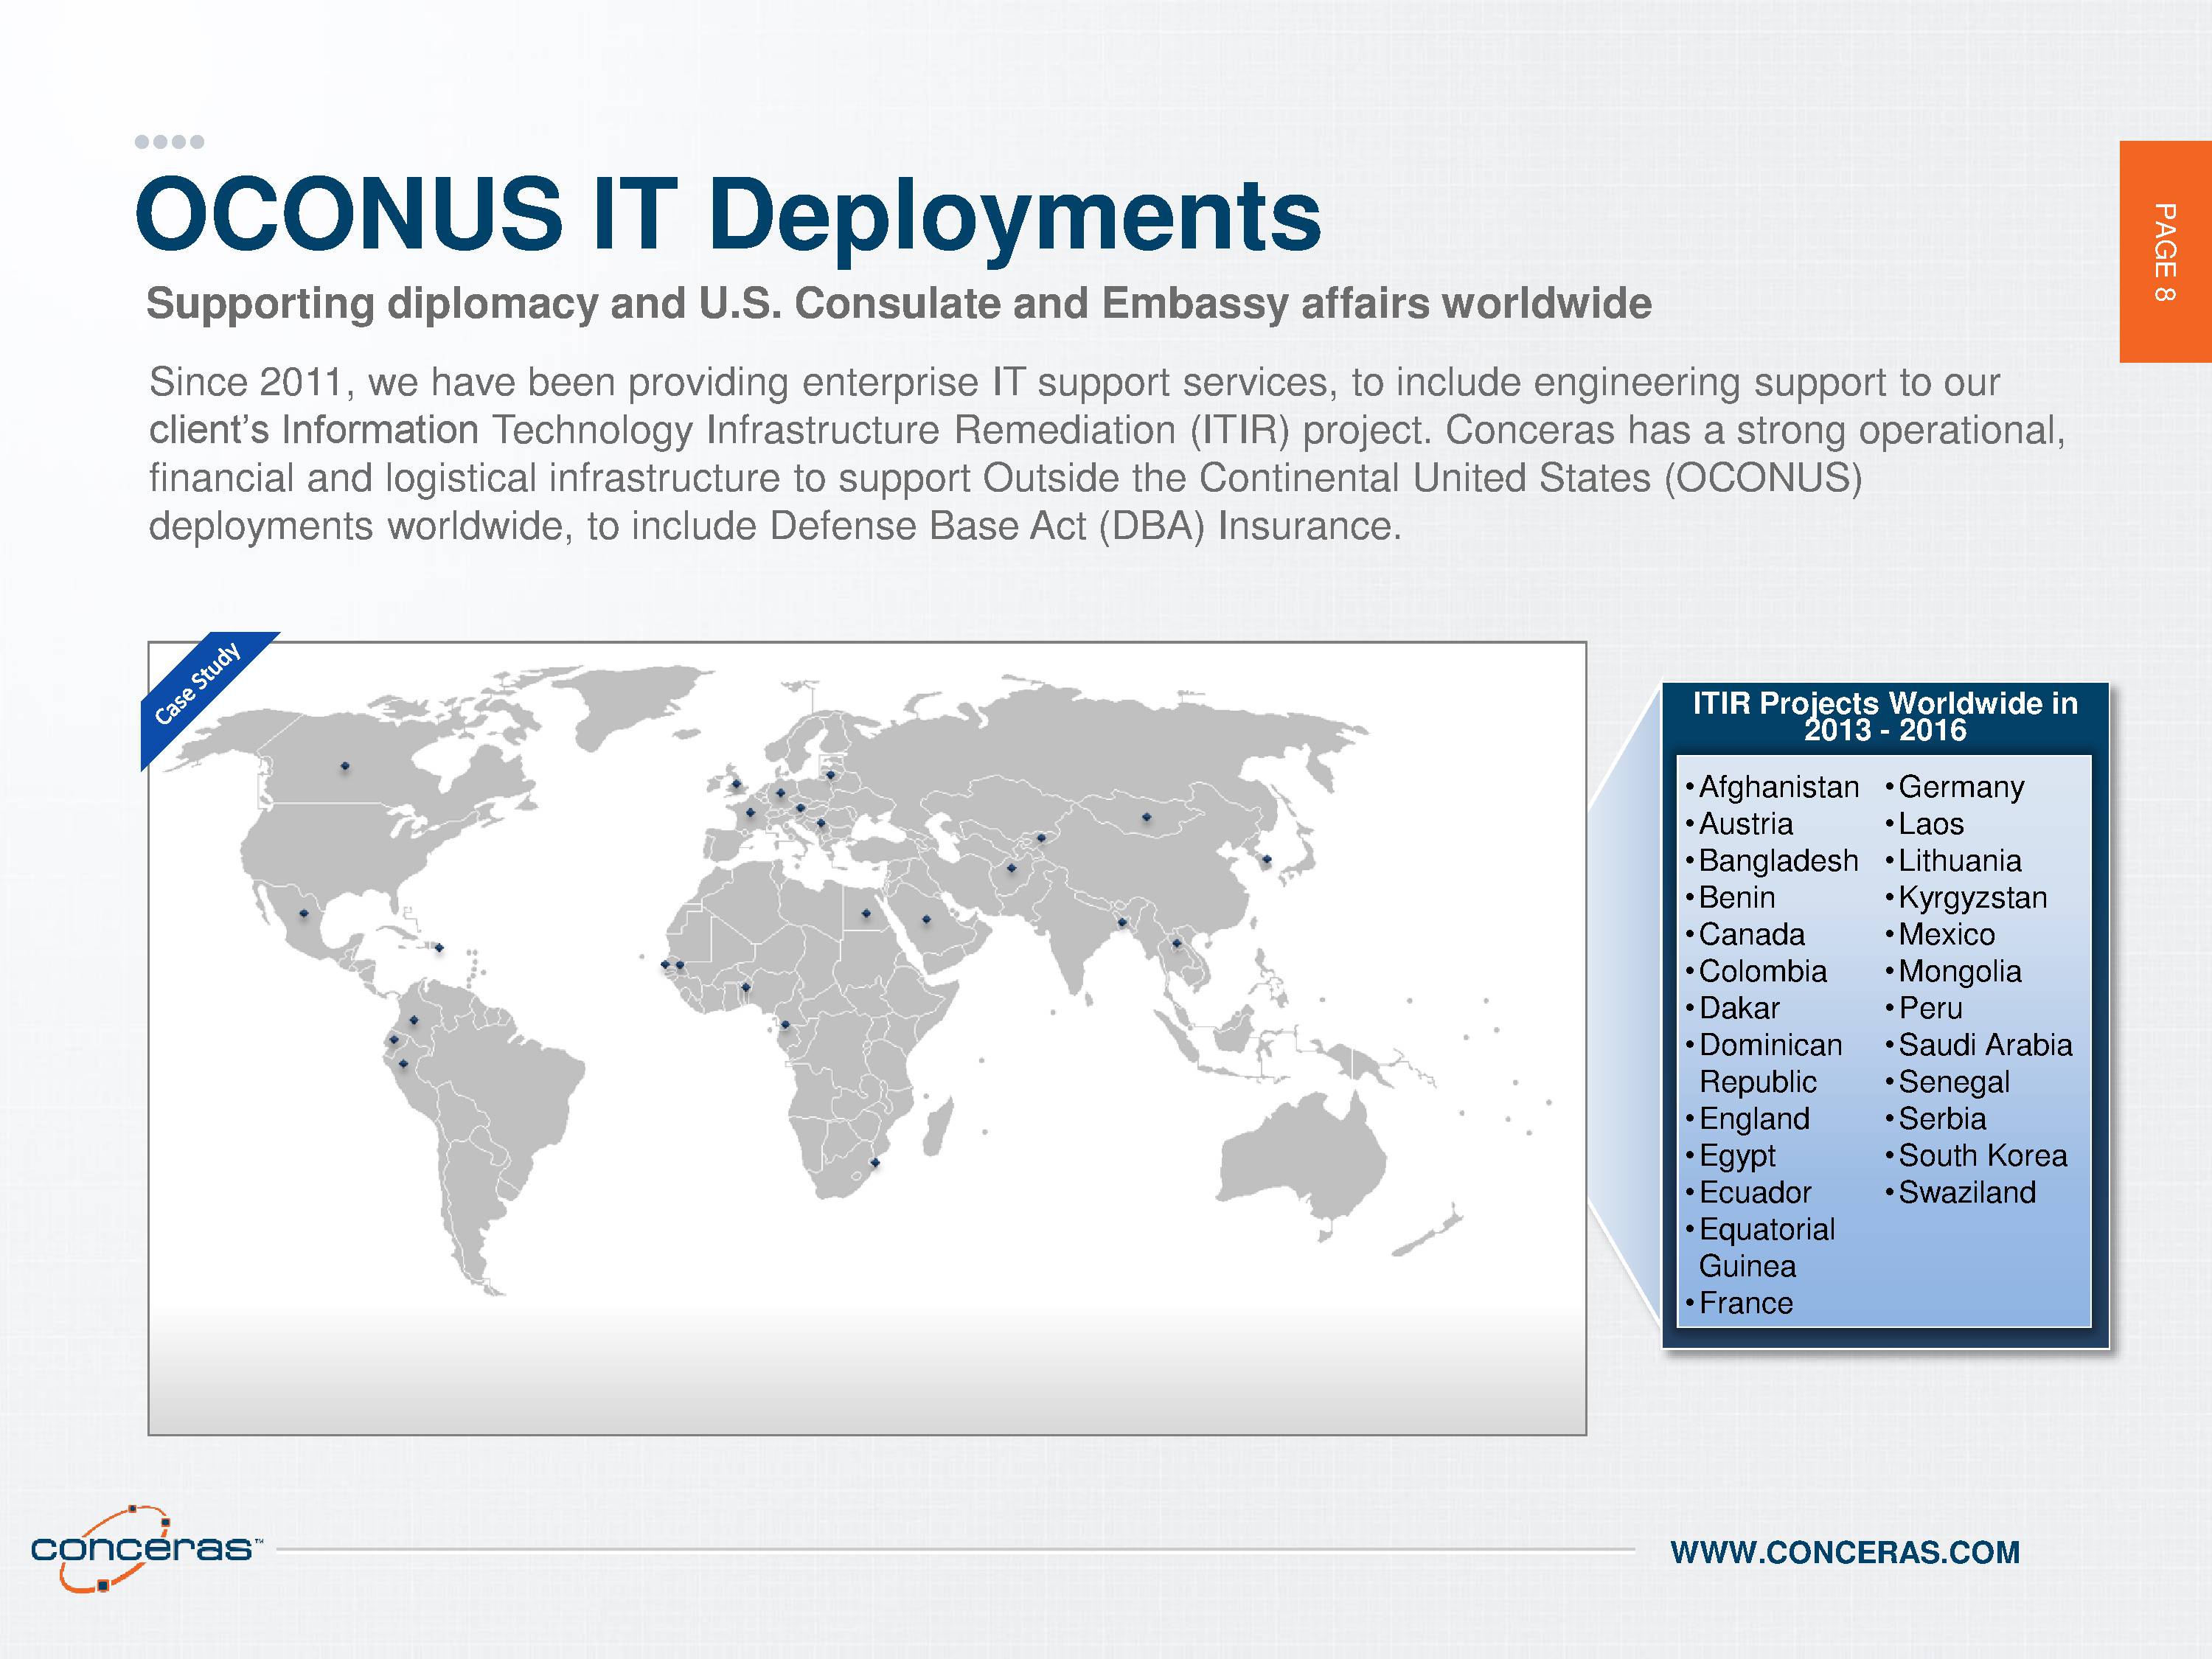 Infographic of Ocunus IT Deployments